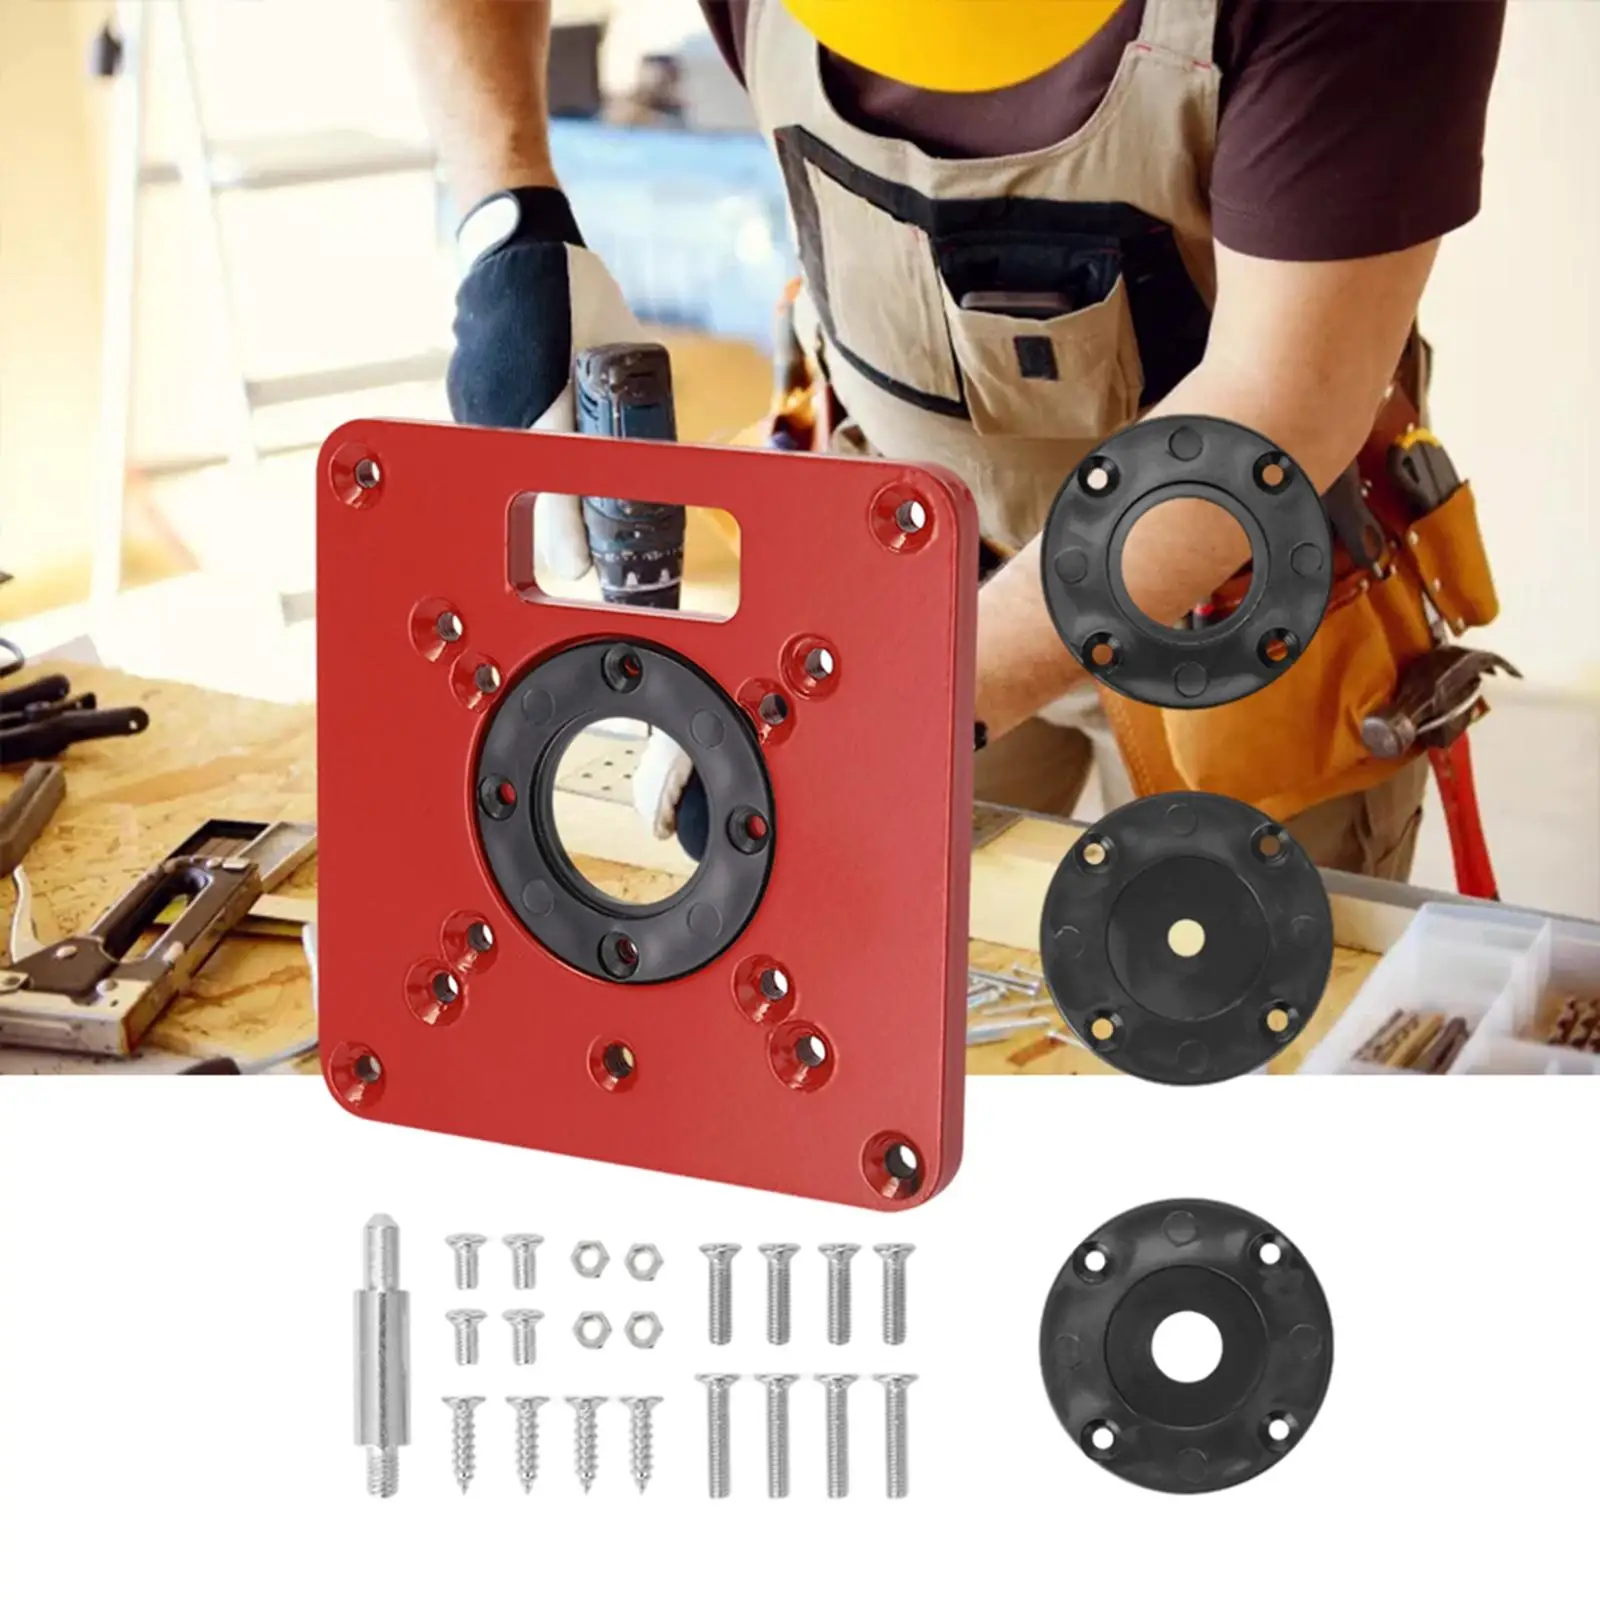 Multi-Functional Router Table Insert Plate Trimmer Machine Plate Wood Router Trimming Machine Flip Board for Woodworking DIY Kit